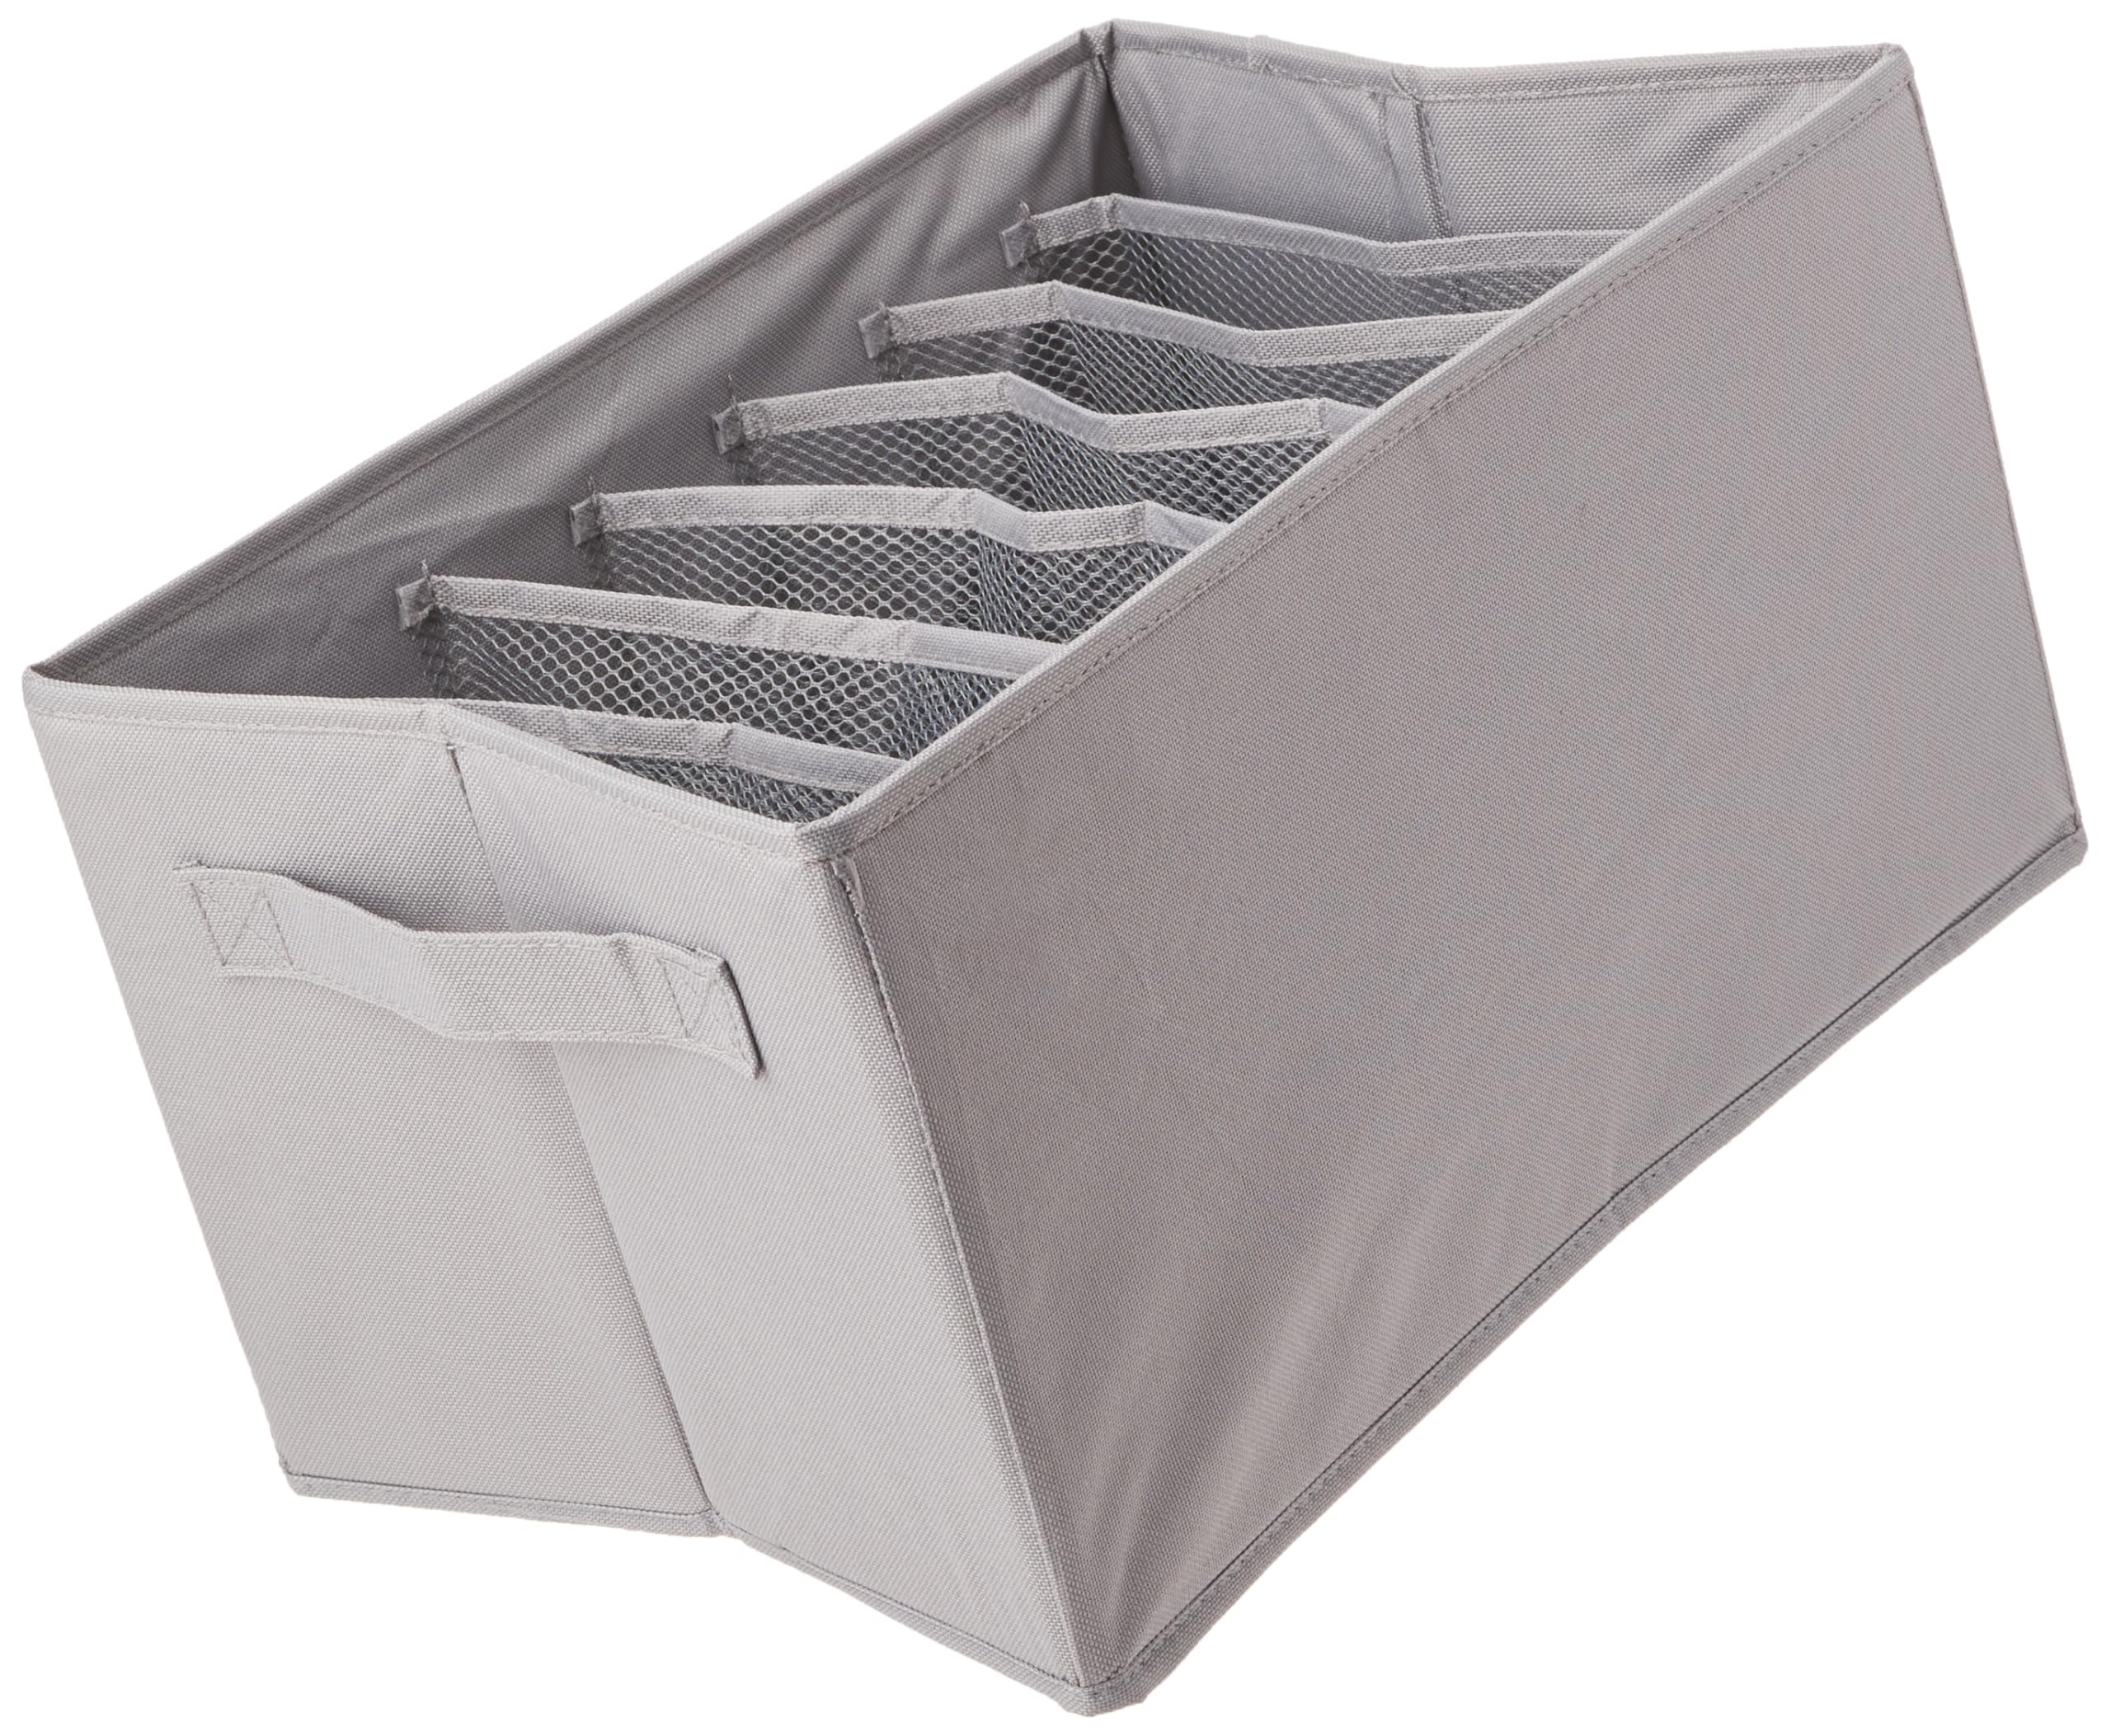 2-Pack Amazon Basics Underwear Dresser Drawer Organizers (Gray) $4.10 + Free Shipping w/ Prime or on orders over $35